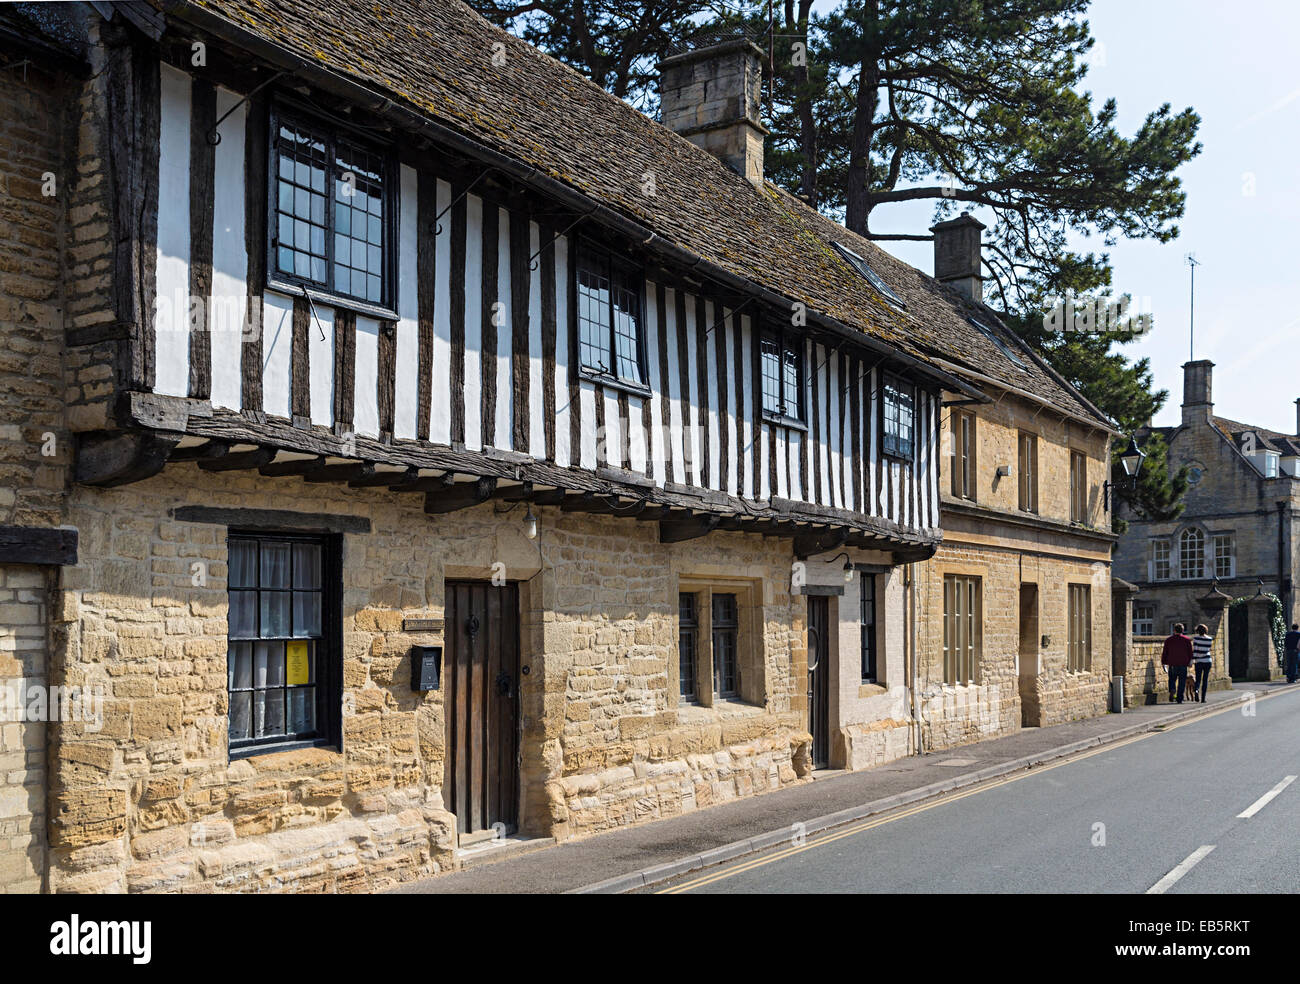 Half timbered black and white Cotswold stone house, Northleach, Oxfordshire, Cotswolds, UK Stock Photo